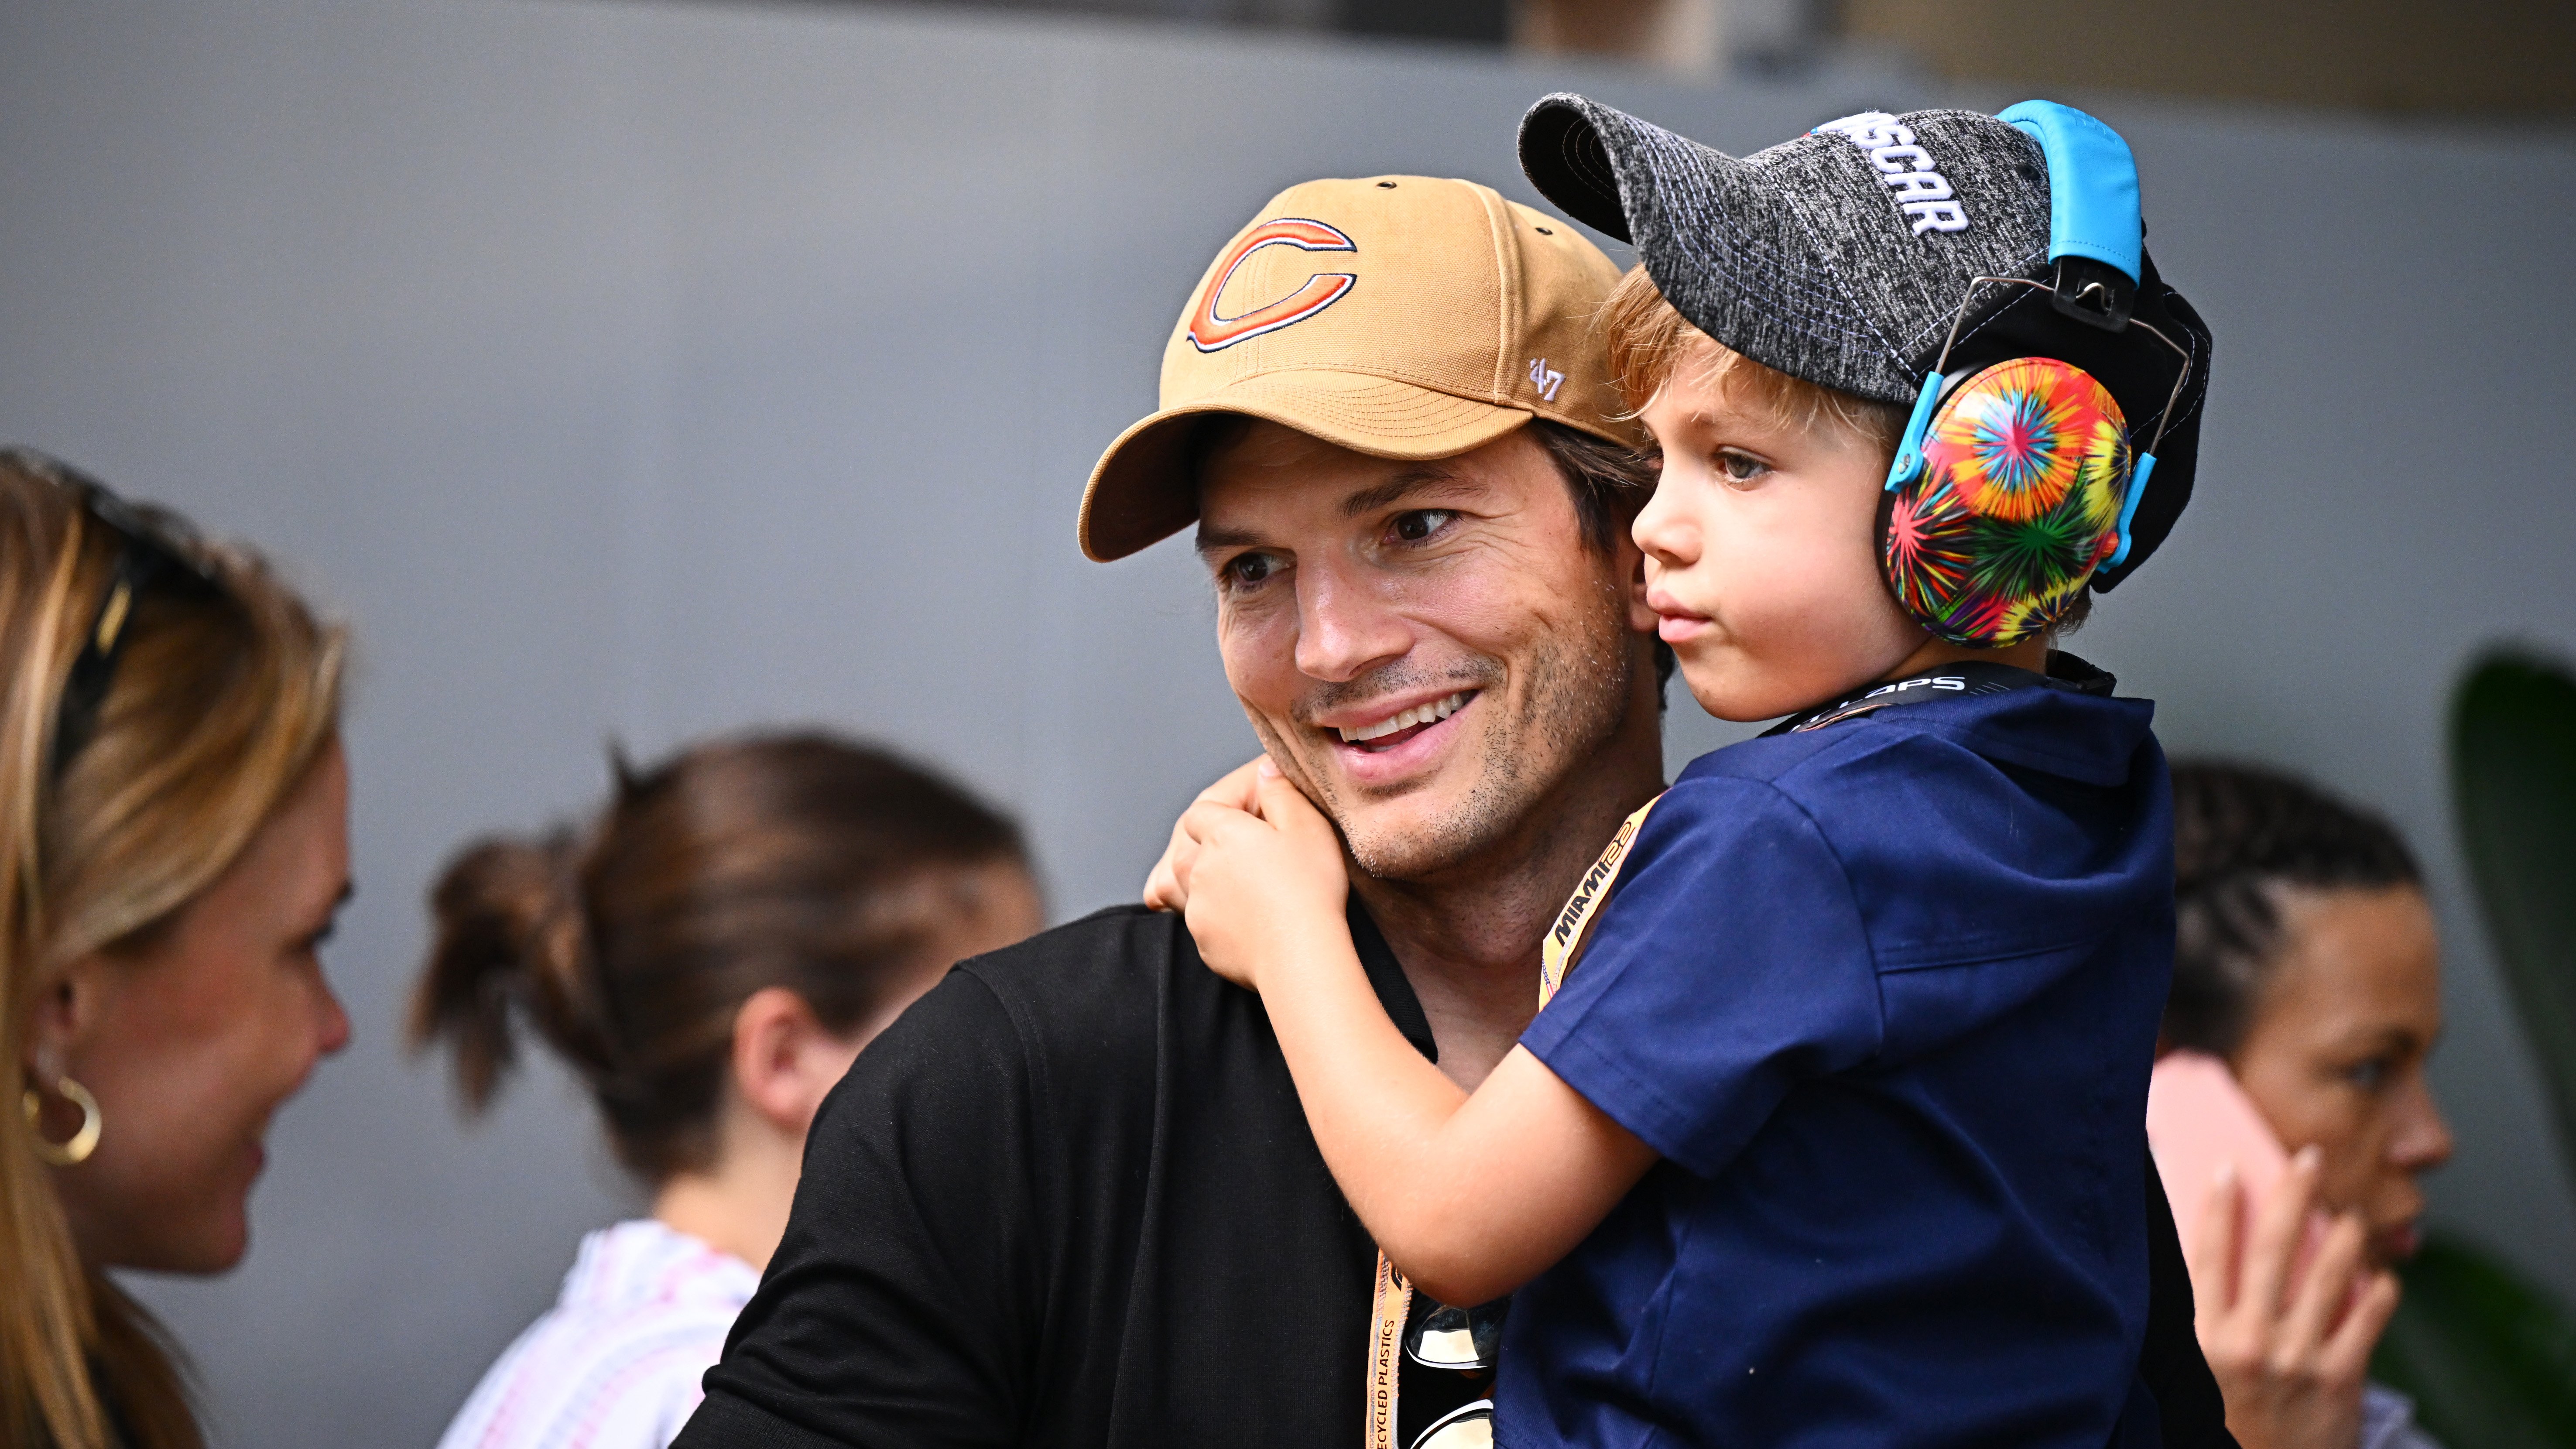 Ashton Kutcher and his son Dmitri in the paddock prior to the F1 Grand Prix of Miami at the Miami International Autodrome on May 08, 2022 in Miami | Source: Getty Images